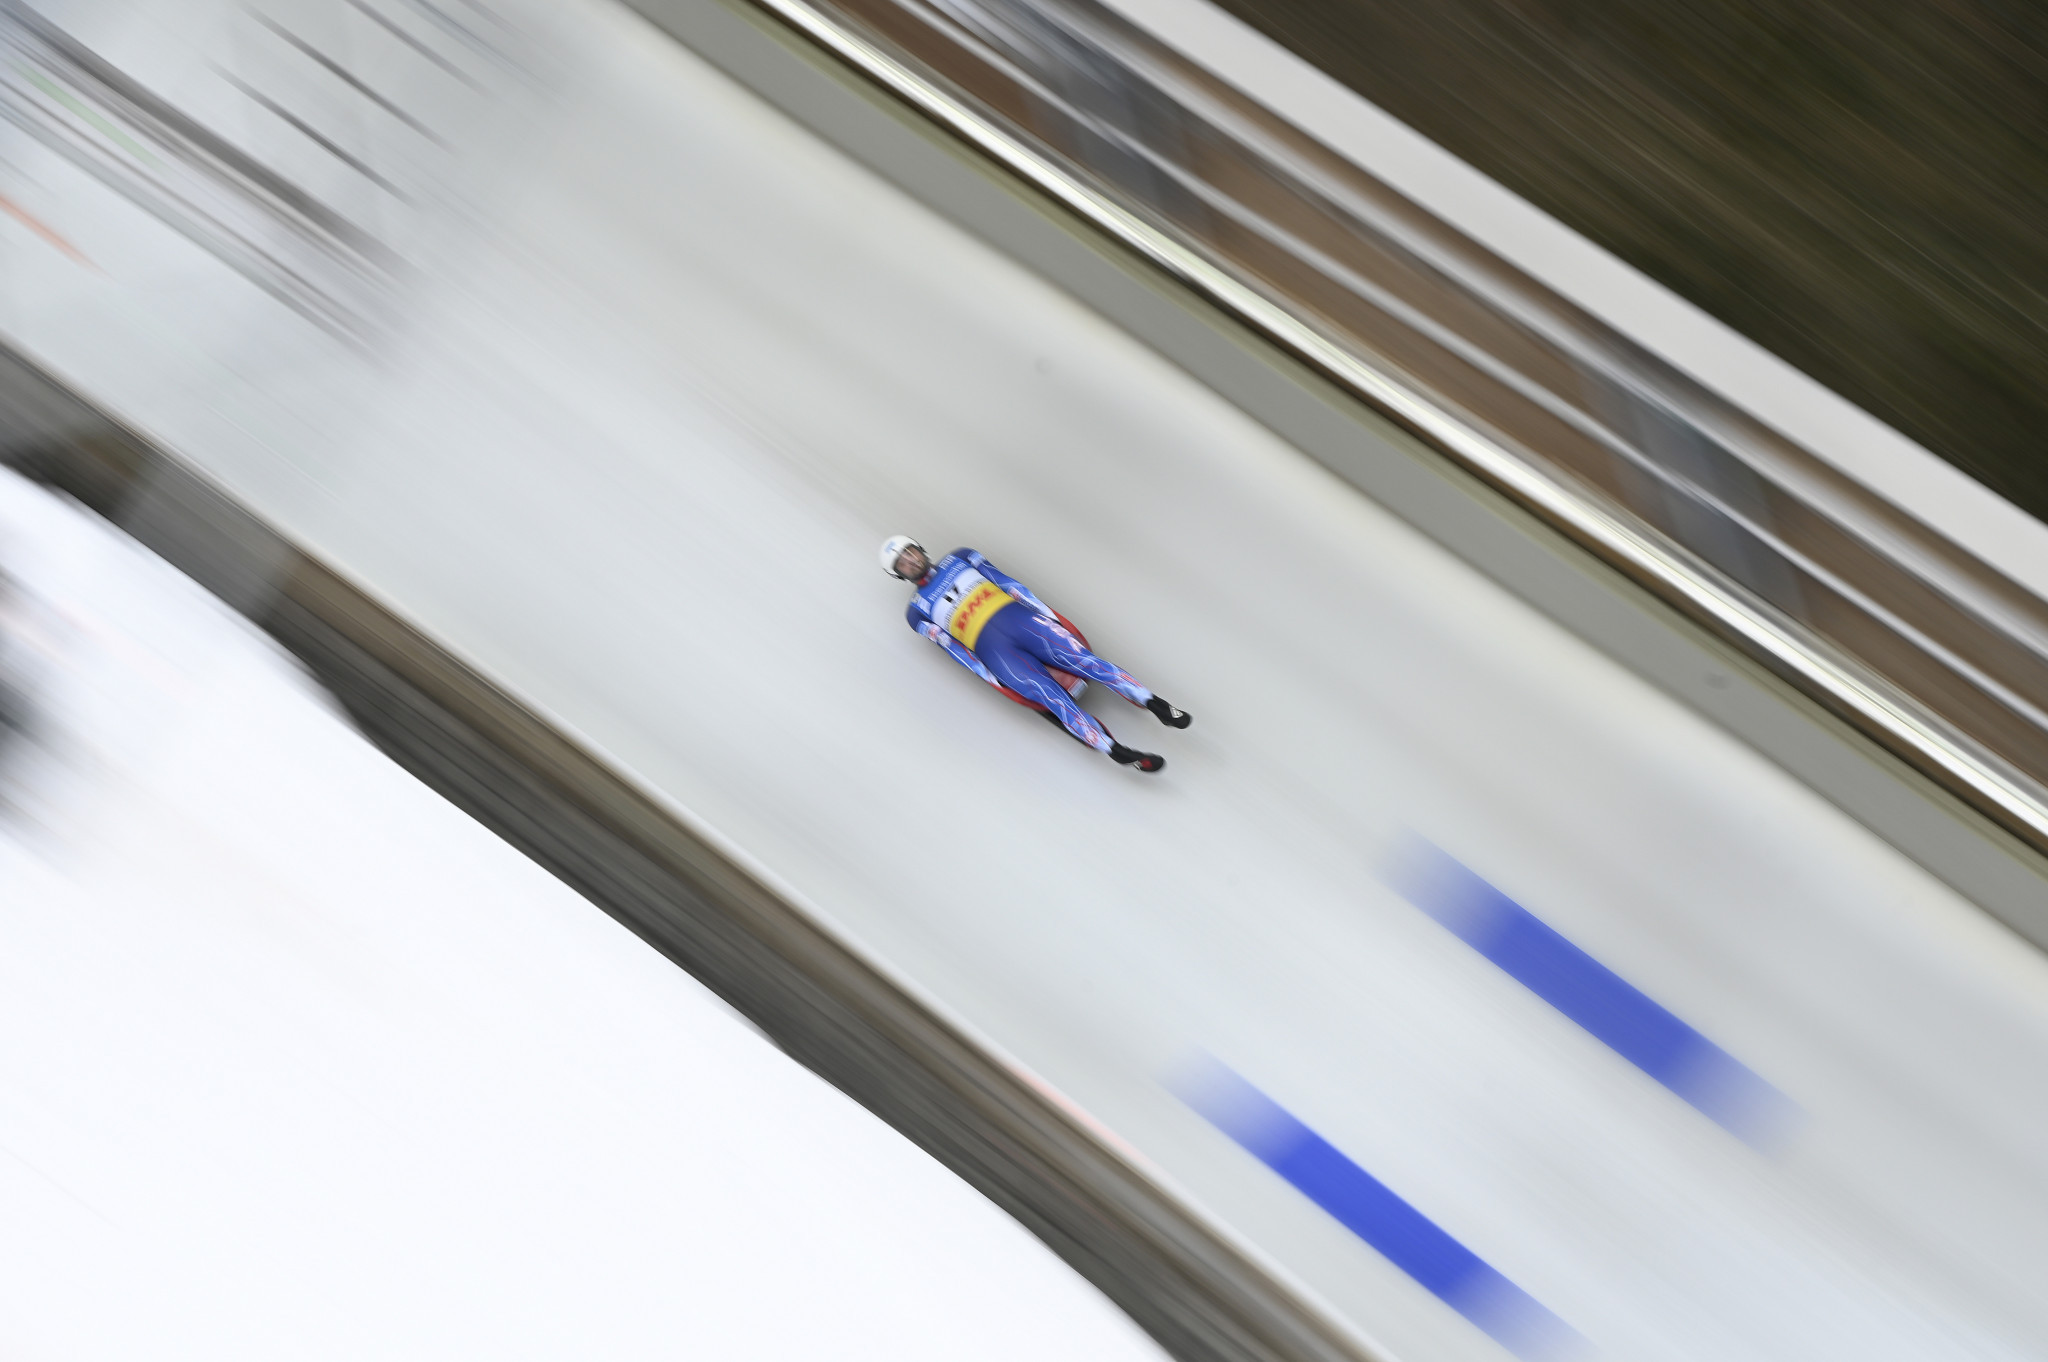 A series of new videos will be released to mark a new partnership between USA Luge and White Castle ©Getty Images